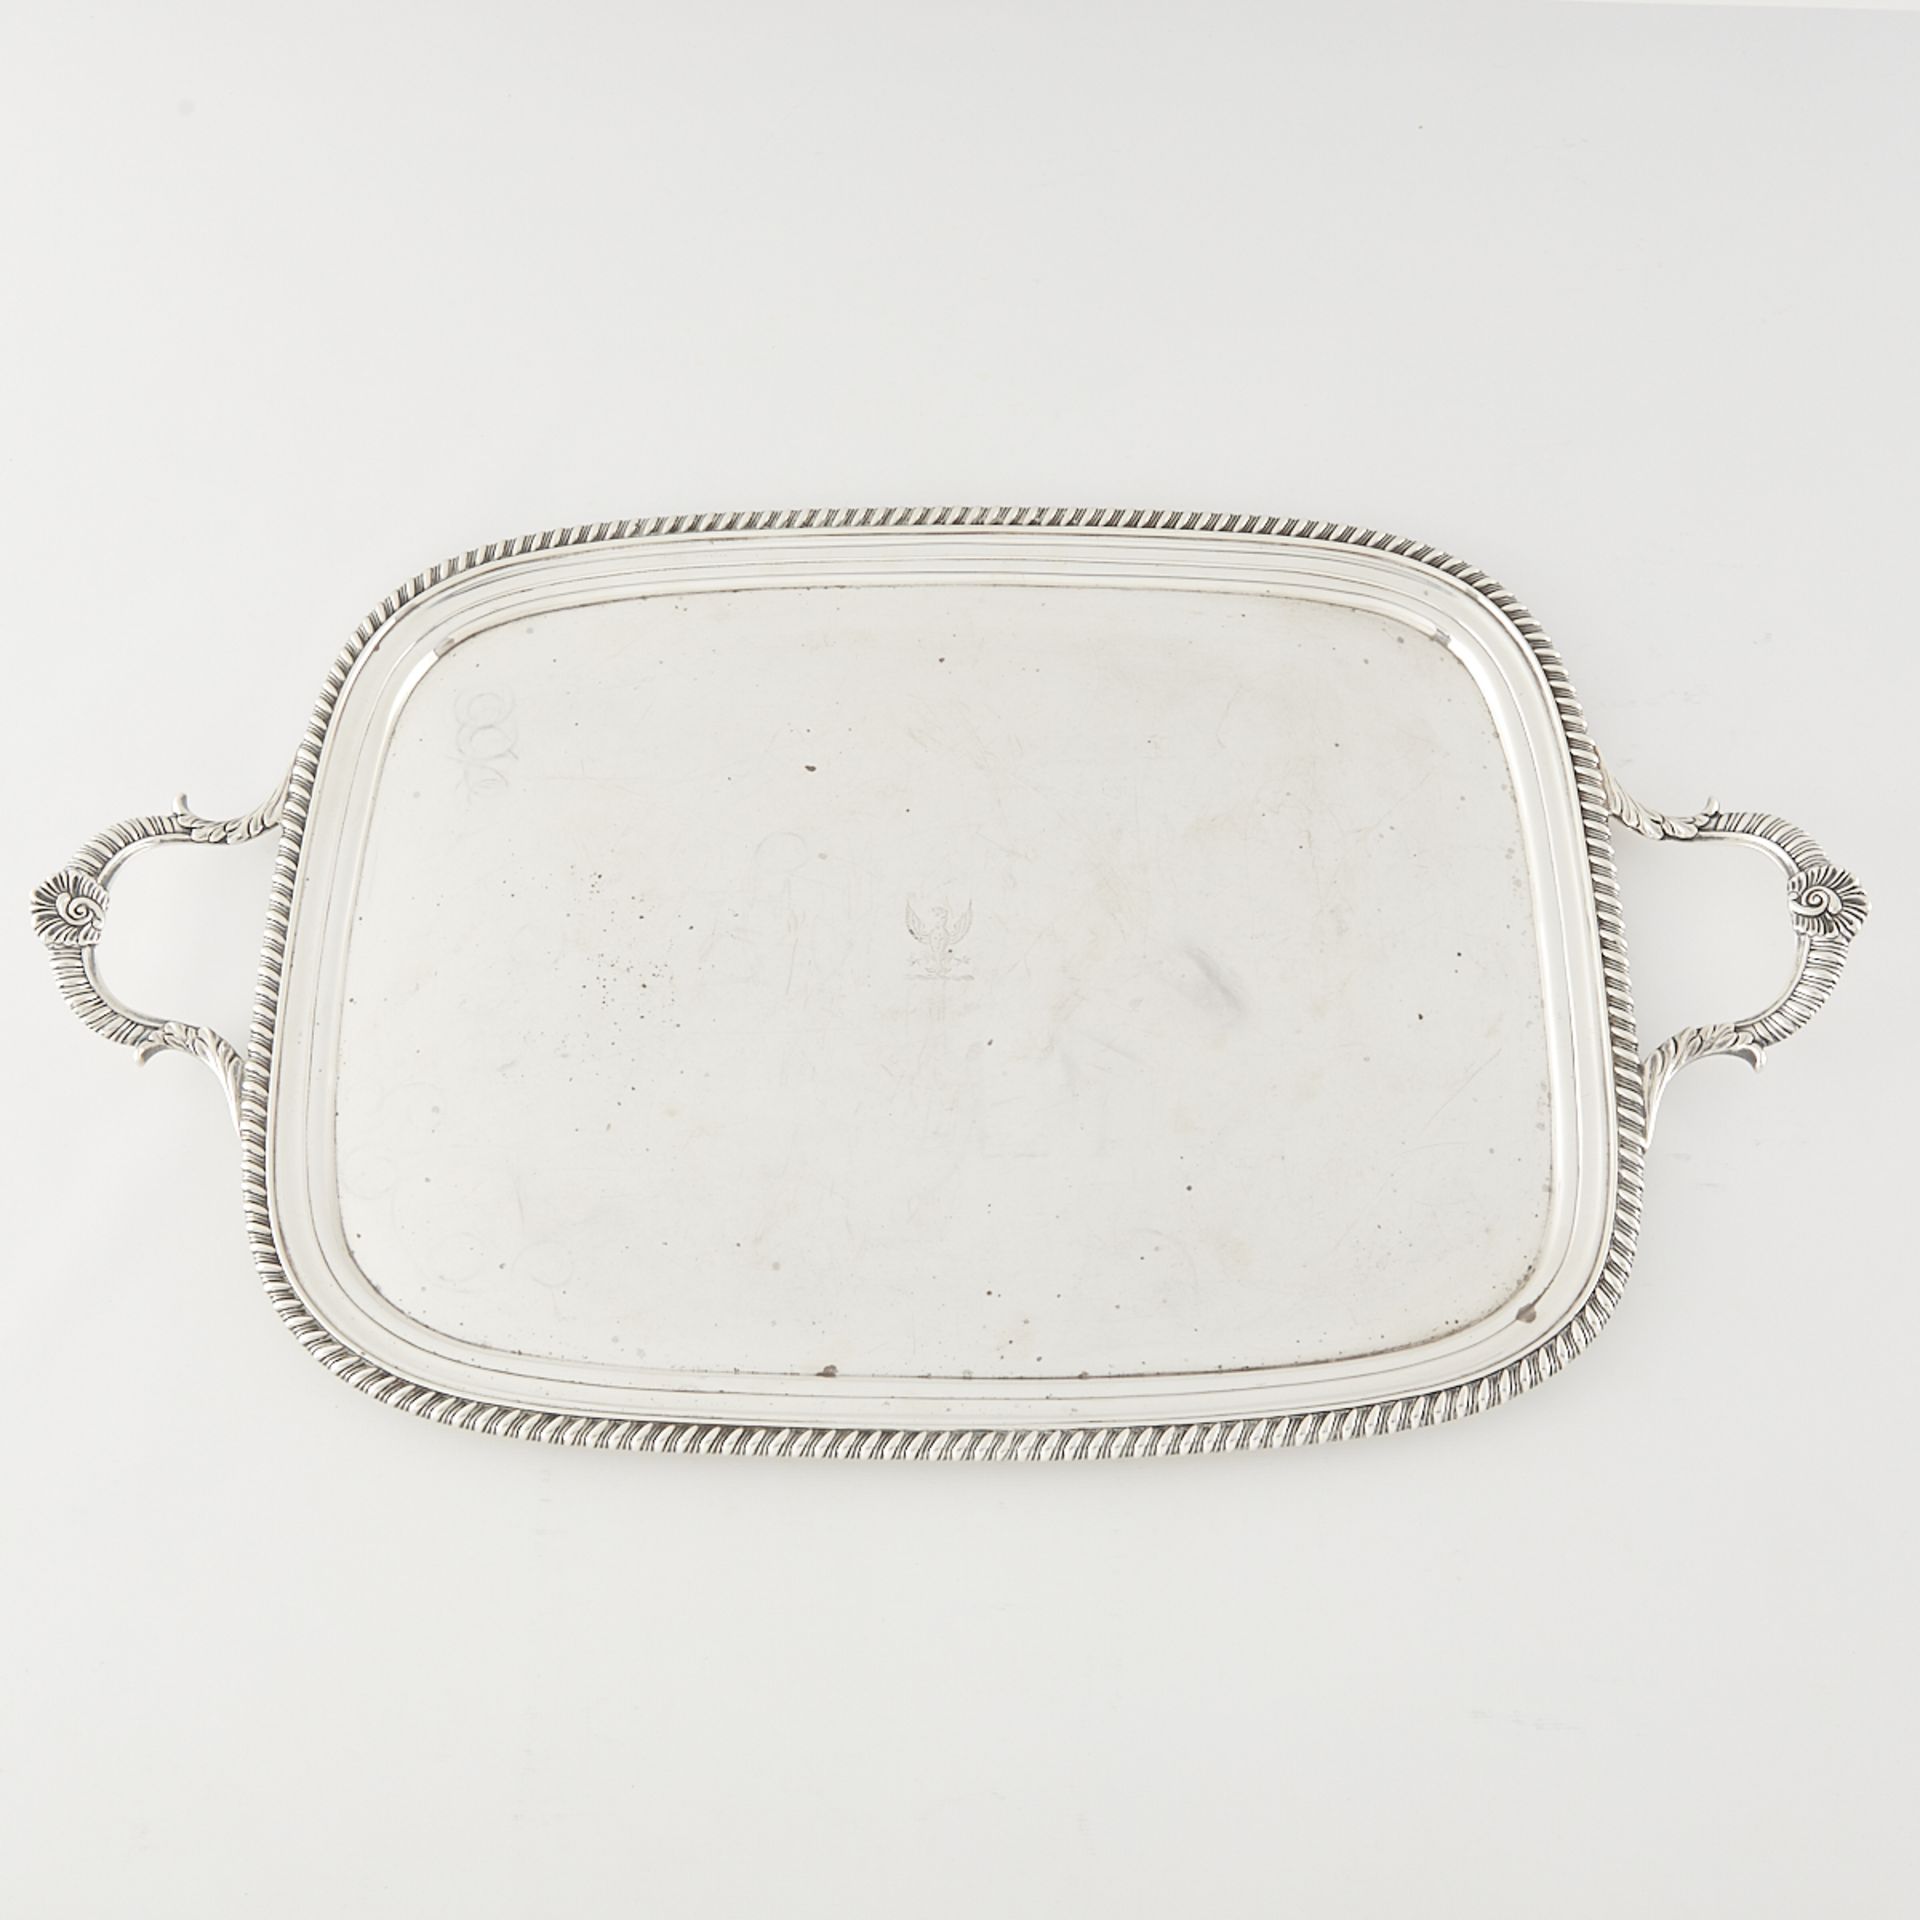 Smith & Hayter Sterling Silver Tray 1825 - Image 3 of 6